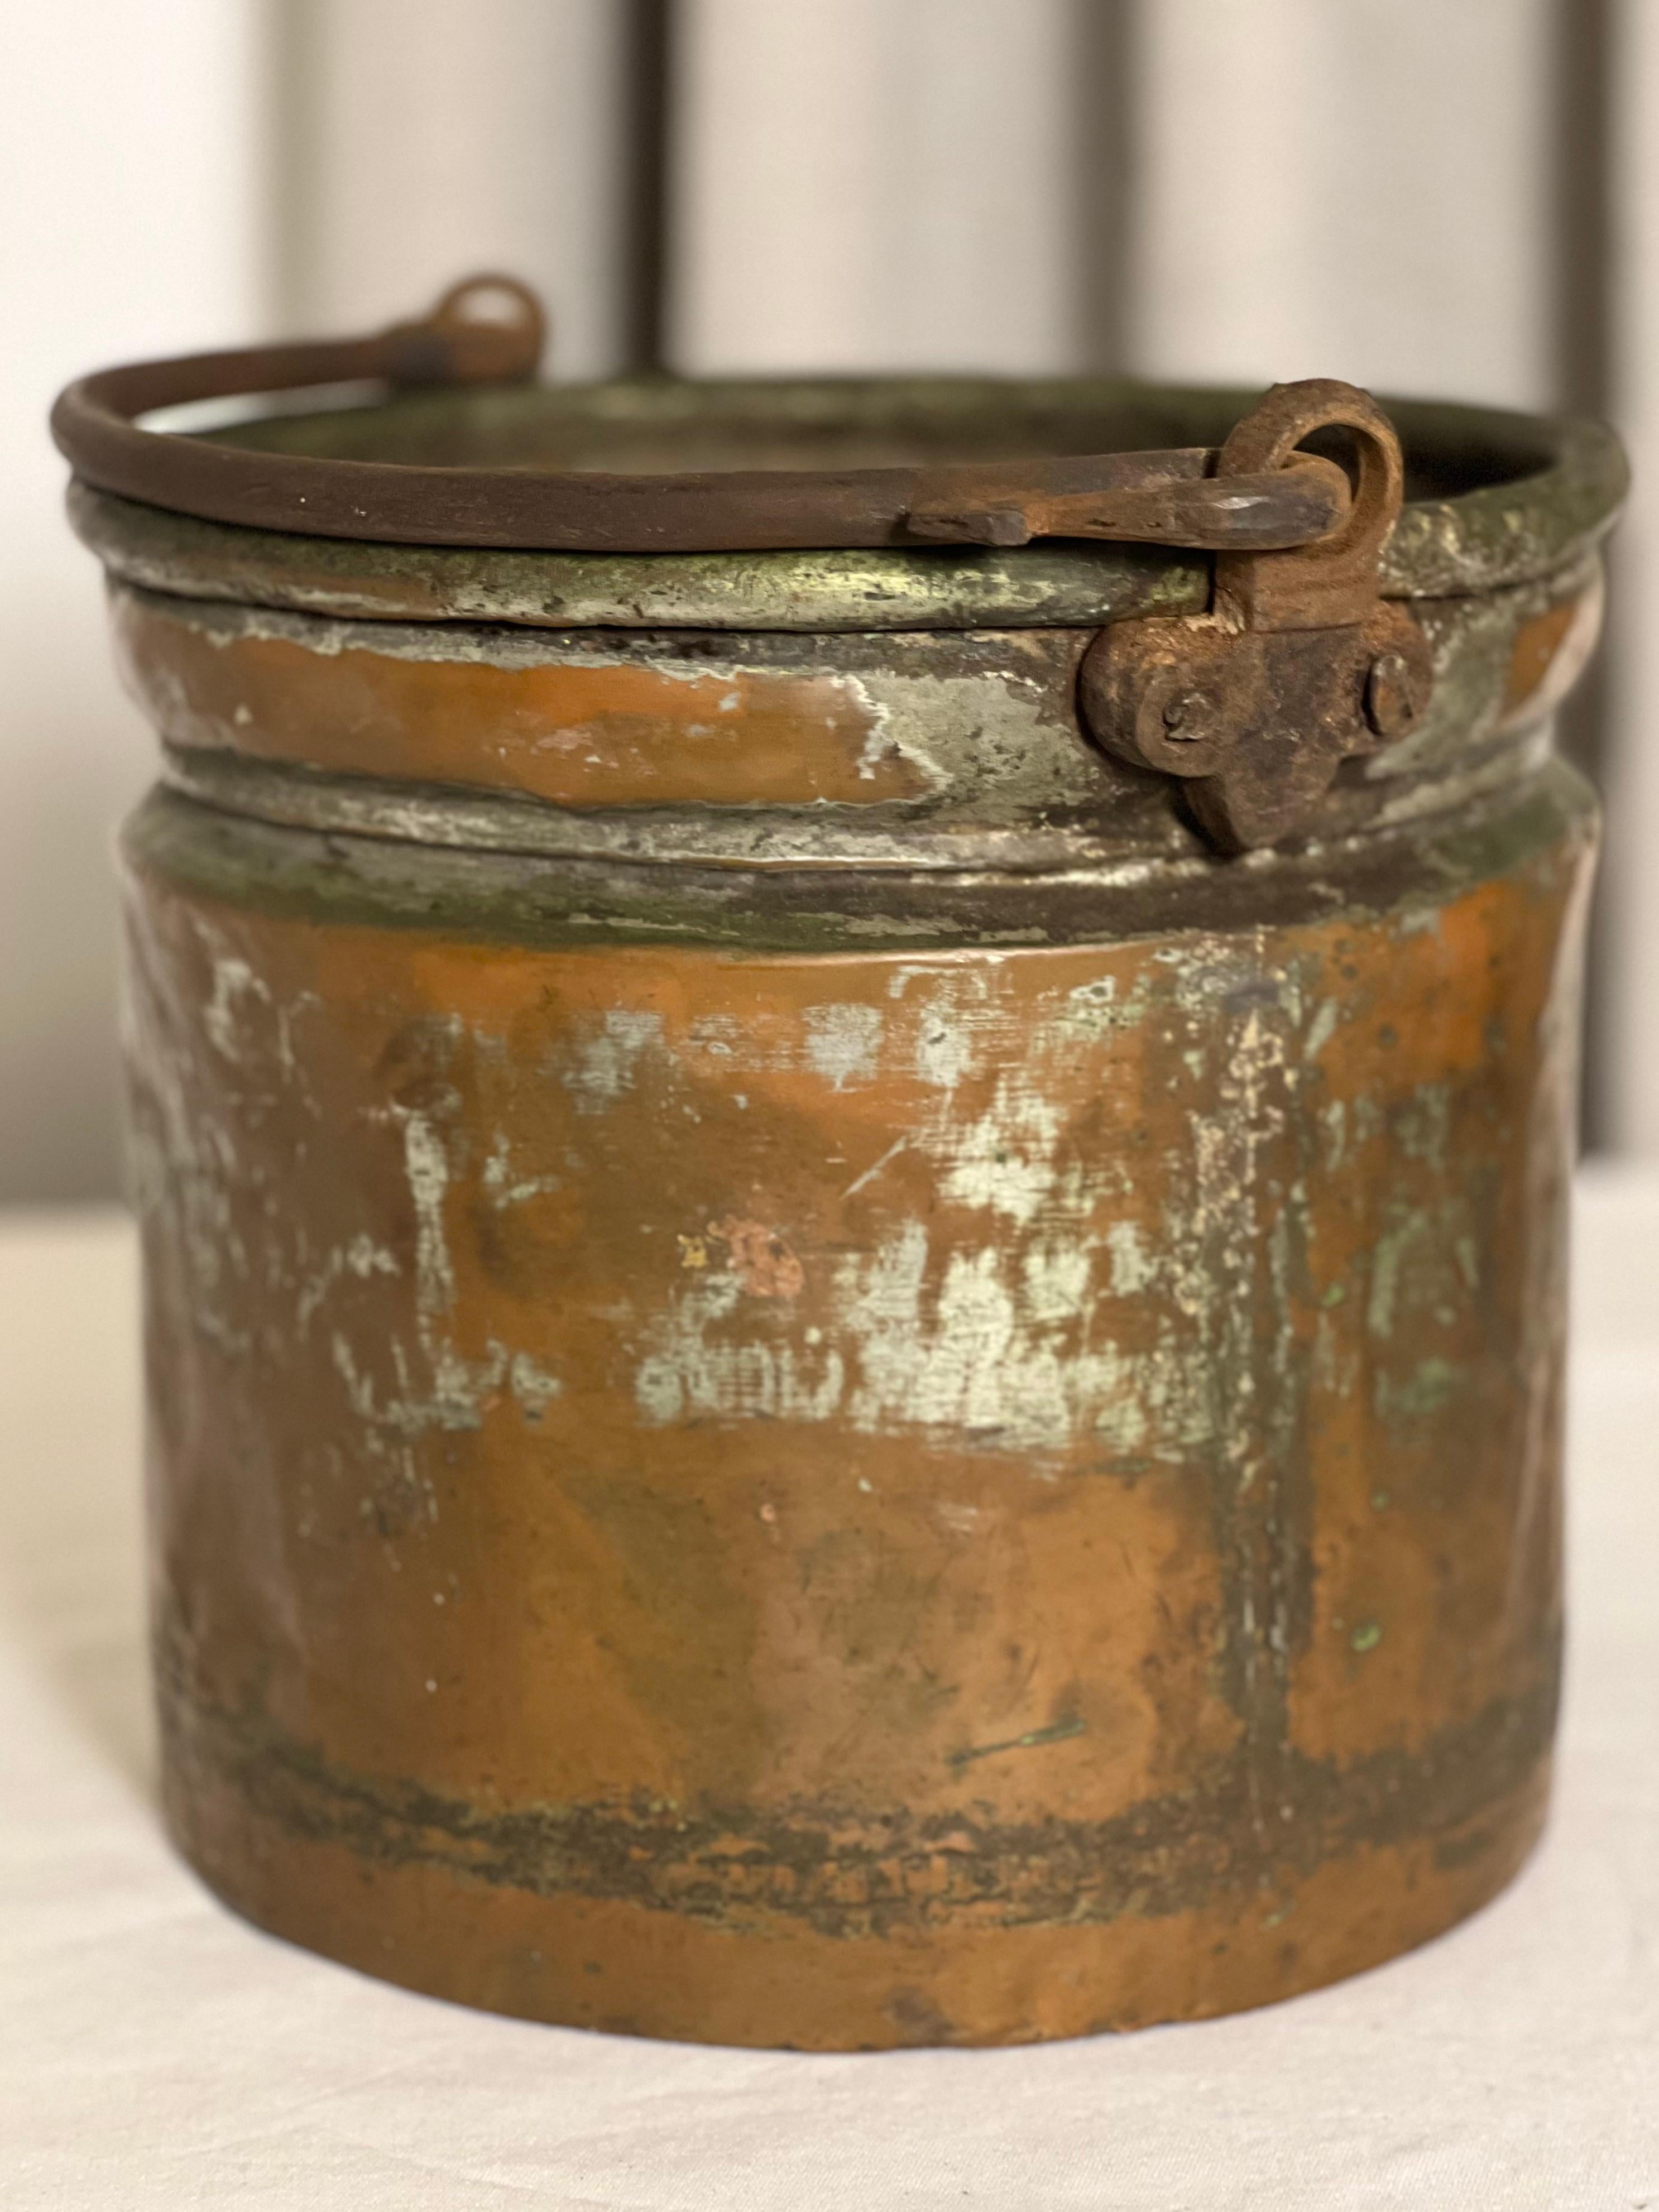 19th century French dovetailed copper bucket or jardiniere with handle.

Fantastic bucket from the Southwest of France most likely used as a milk churn. It has a snake form wrought iron handle and great patina. The dovetail construction is a